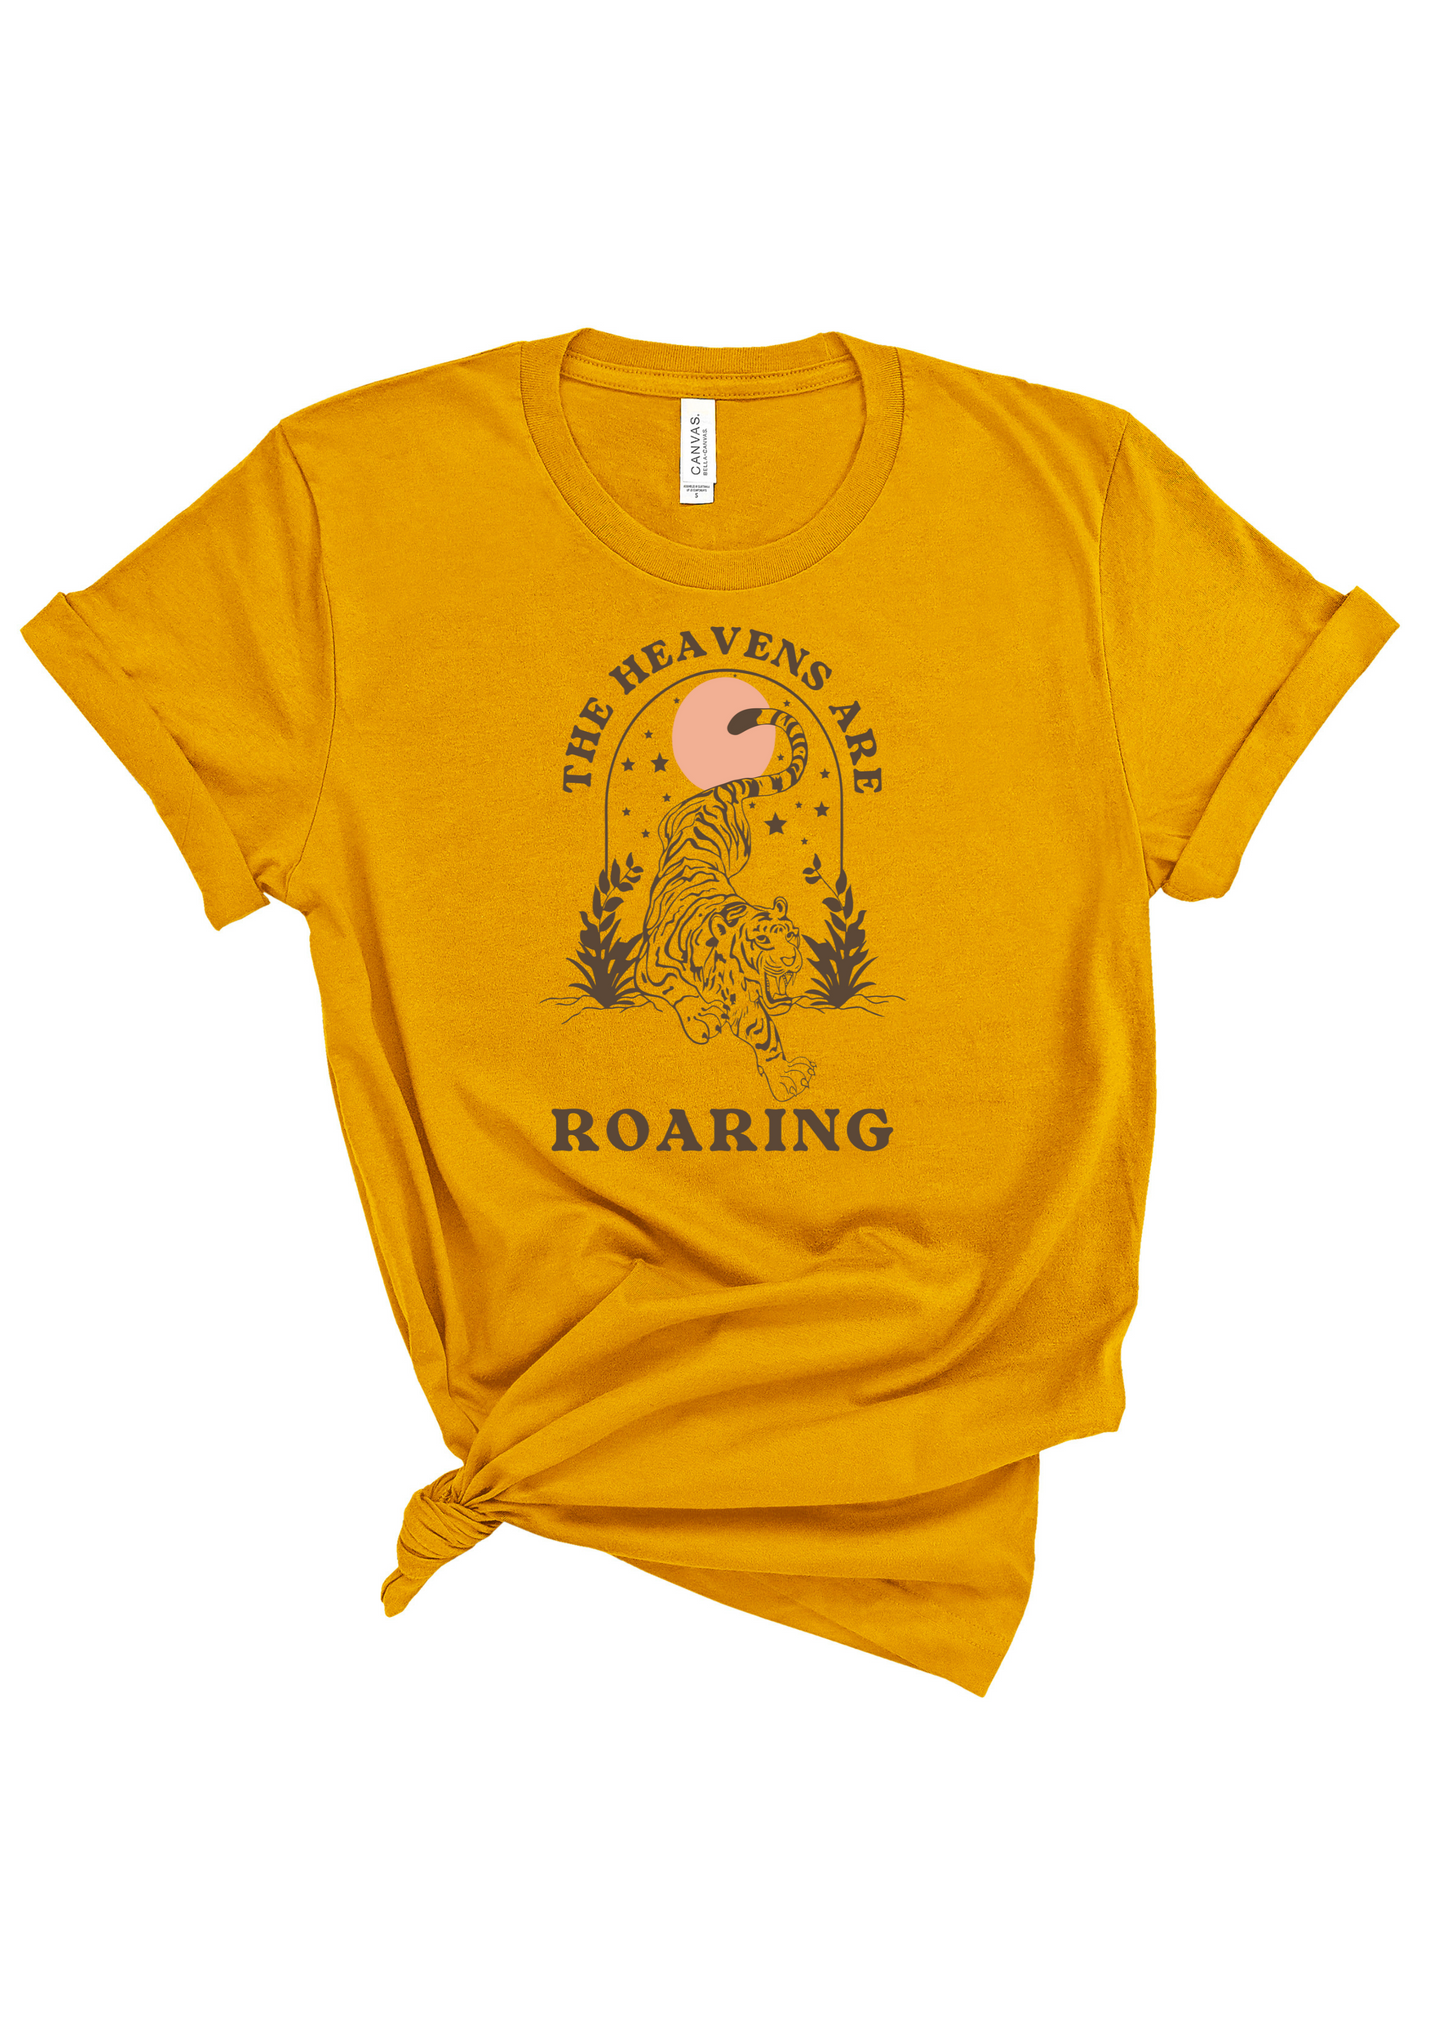 Heavens Are Roaring | Kids Tee | RTS-Kids Tees-Sister Shirts-Sister Shirts, Cute & Custom Tees for Mama & Littles in Trussville, Alabama.